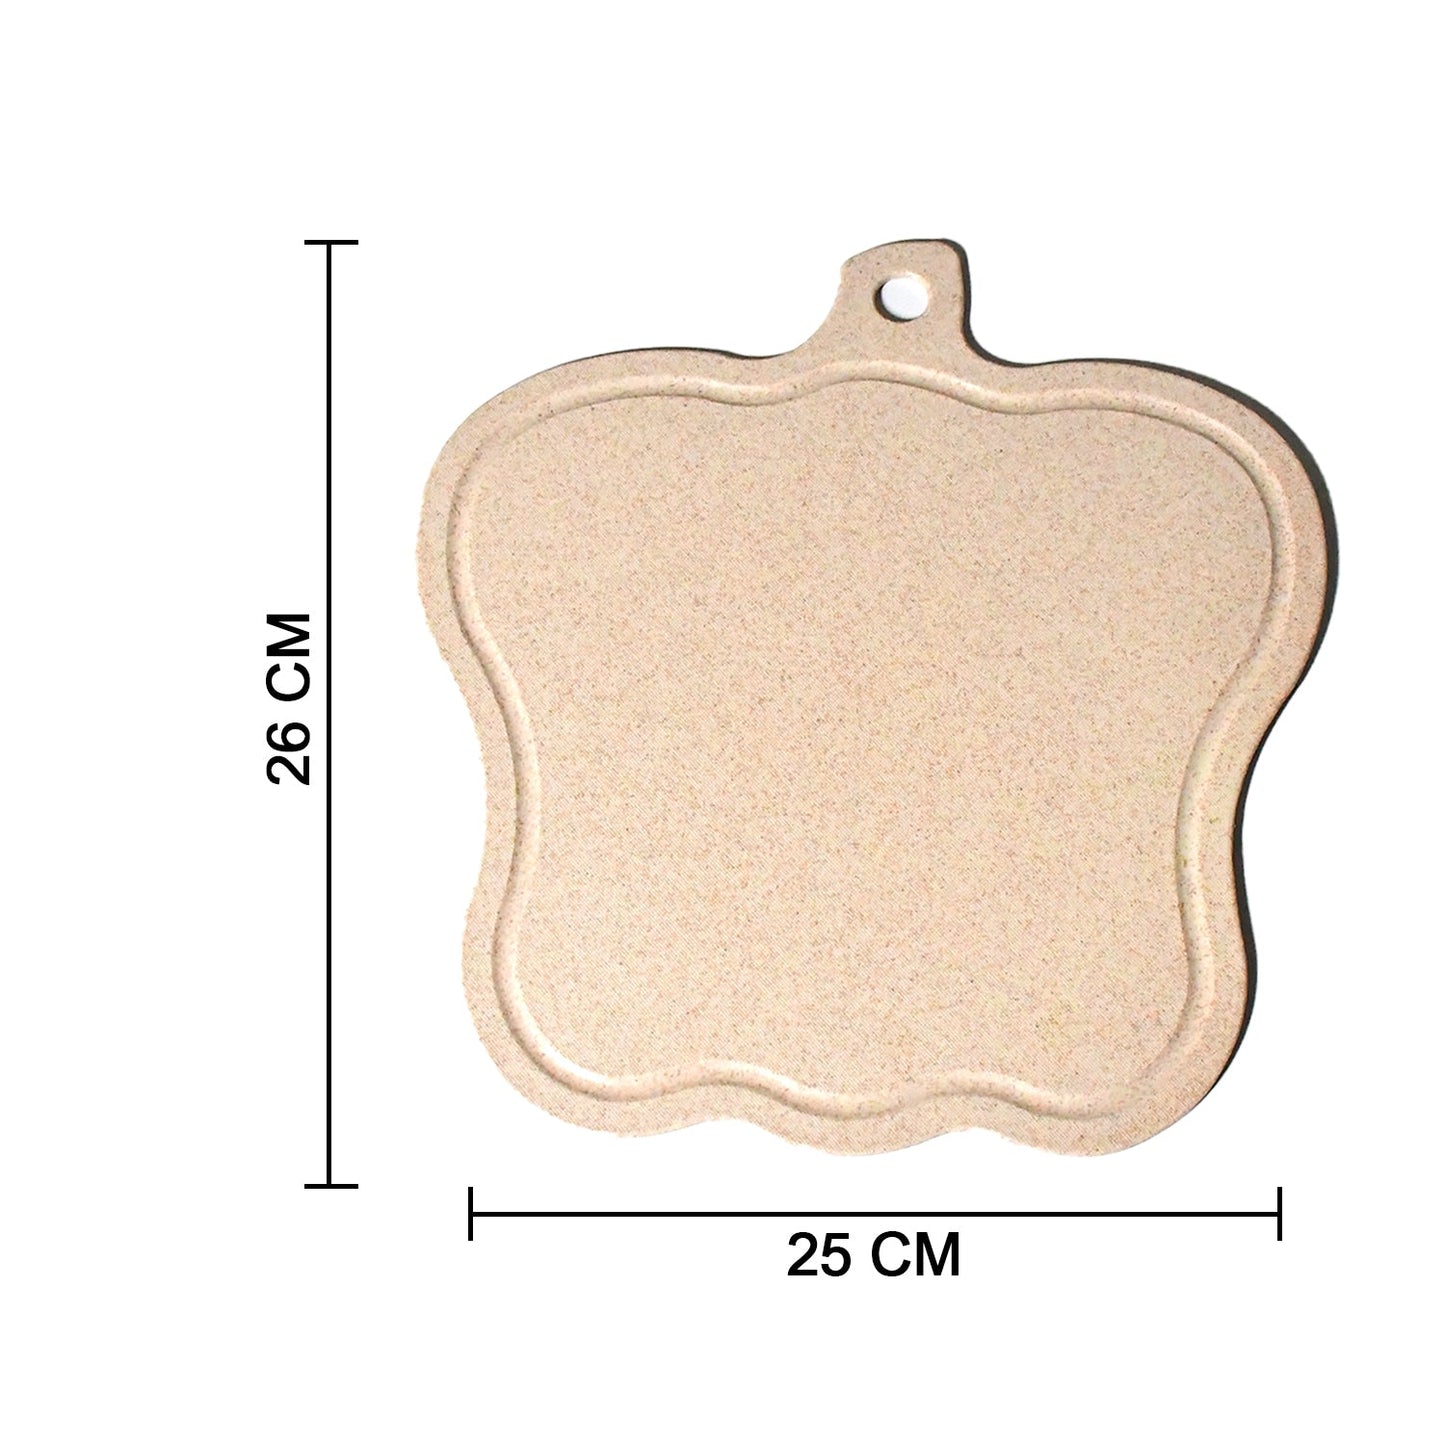 2057 FANCY KITCHEN CHOPPING BOARDS CUTTING BOARD PLASTIC WITH HANGING HOLE FOR REGULAR USE DeoDap